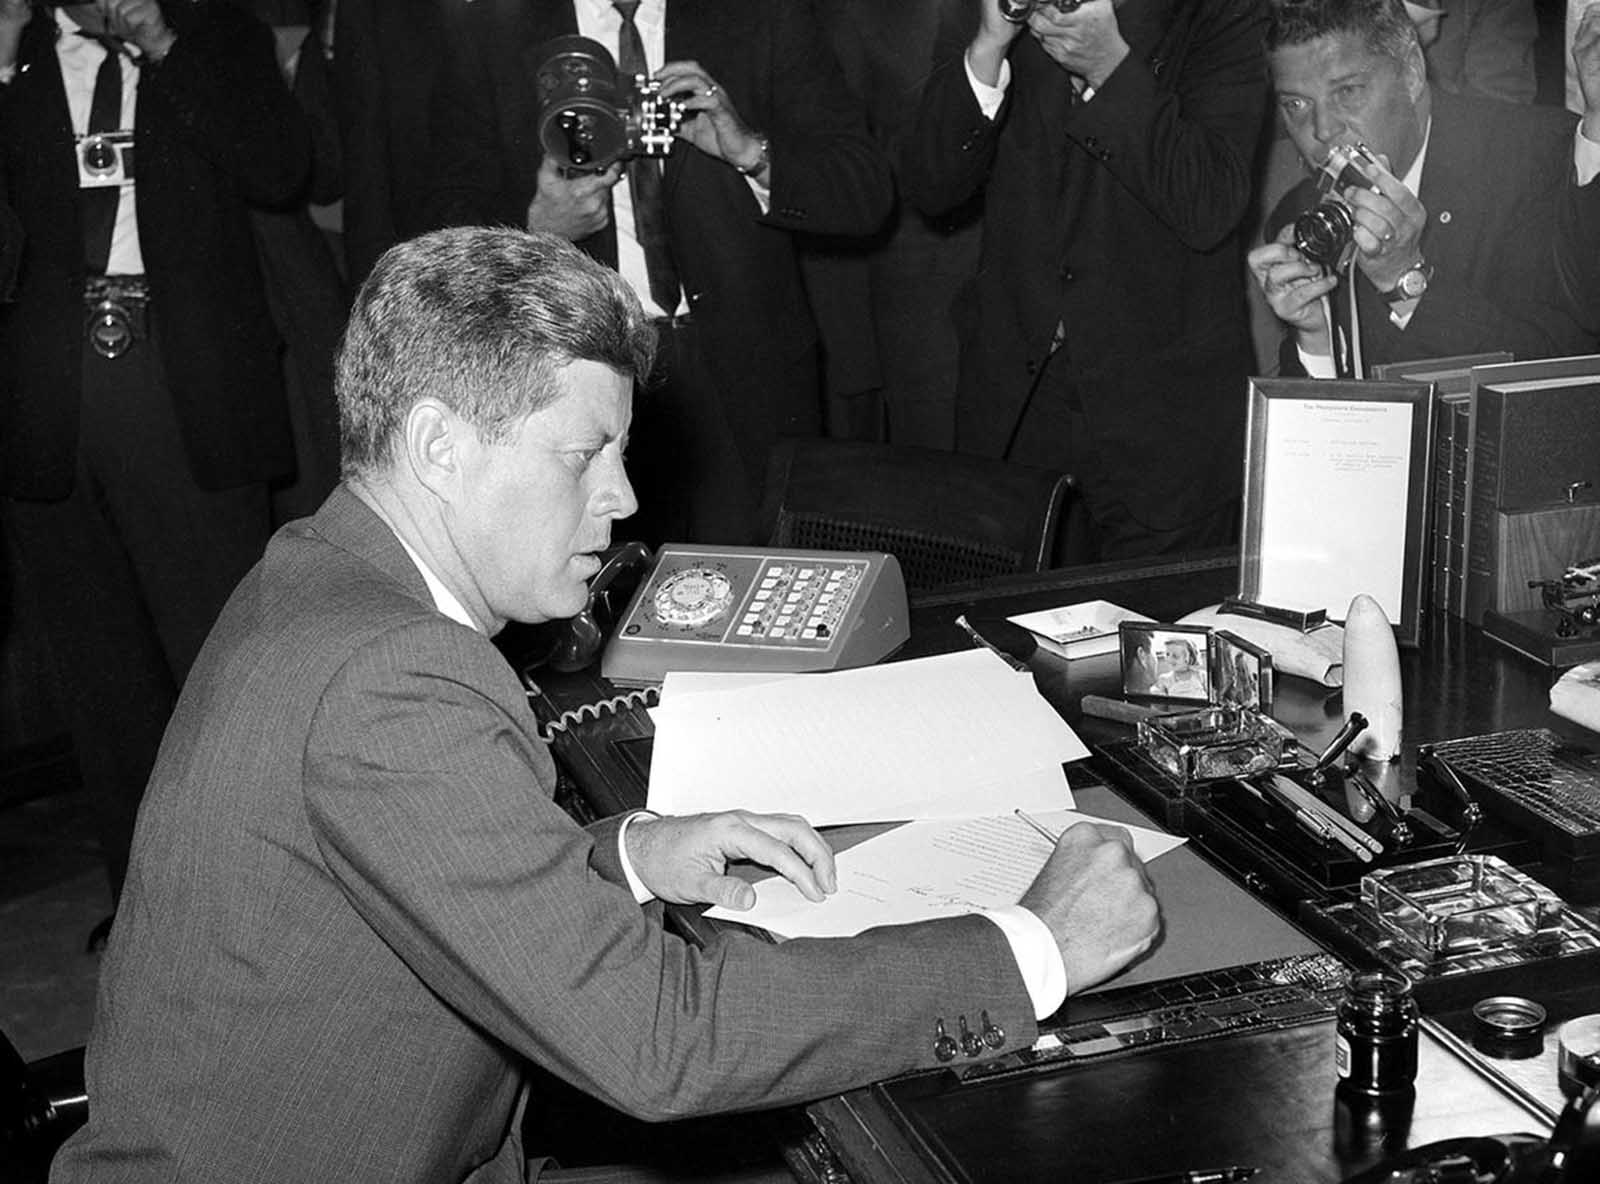 President Kennedy is surrounded by photographers as he sits at his desk in the White House, on October 23, 1962, shortly after signing a presidential proclamation concerning the Cuba Missile crisis.